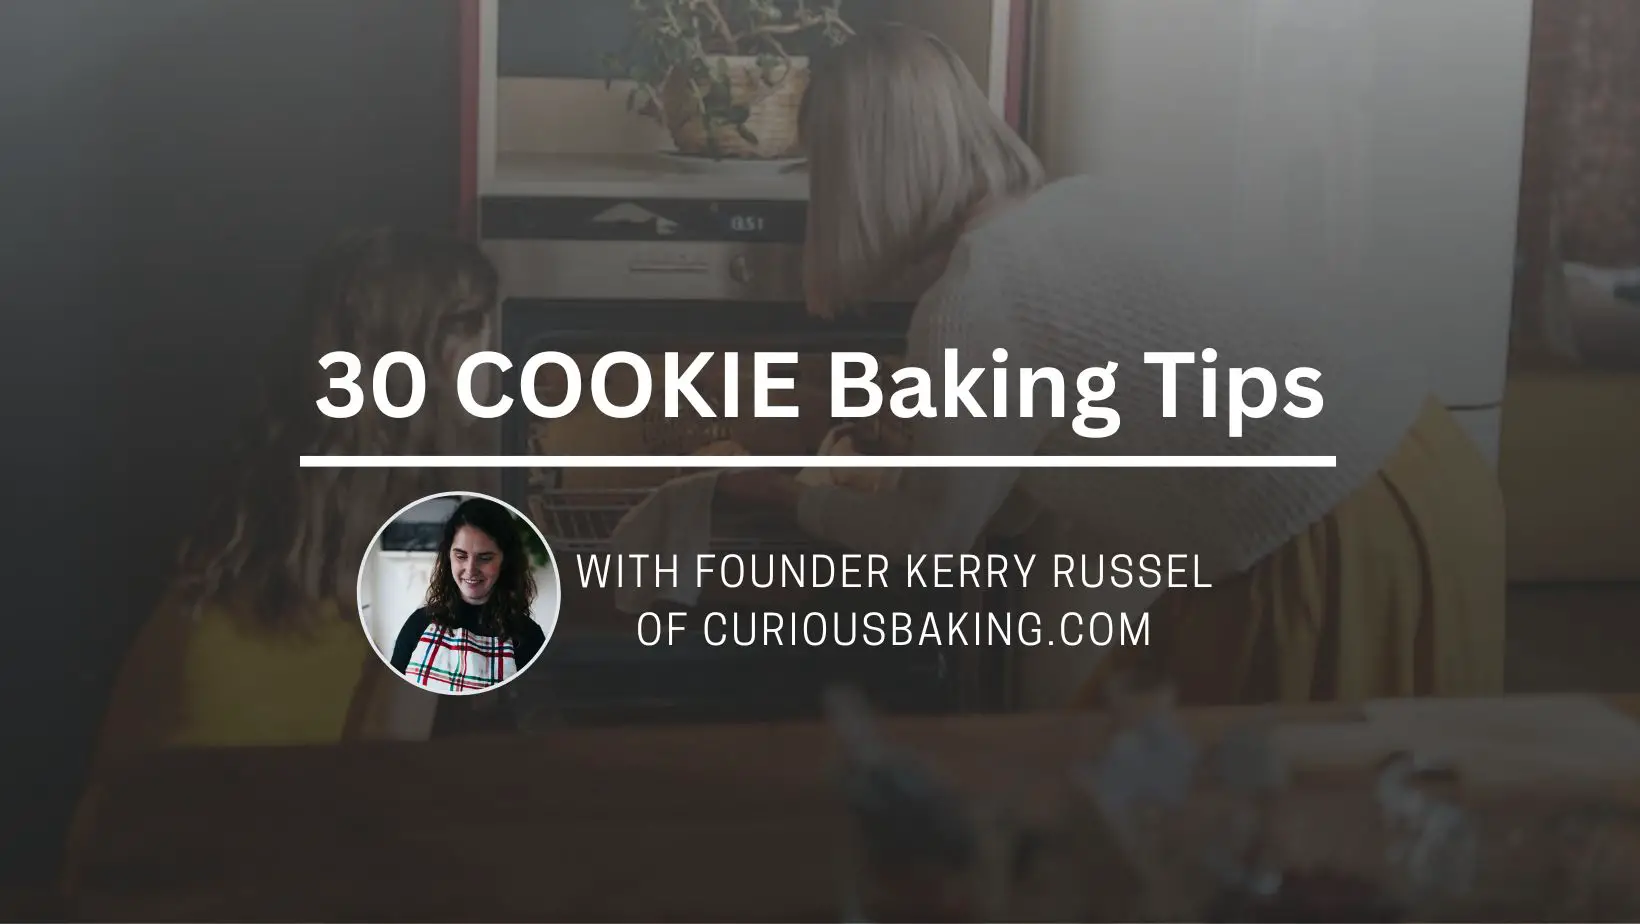 30 Cookie Baking Tips by CuriousBaking.com